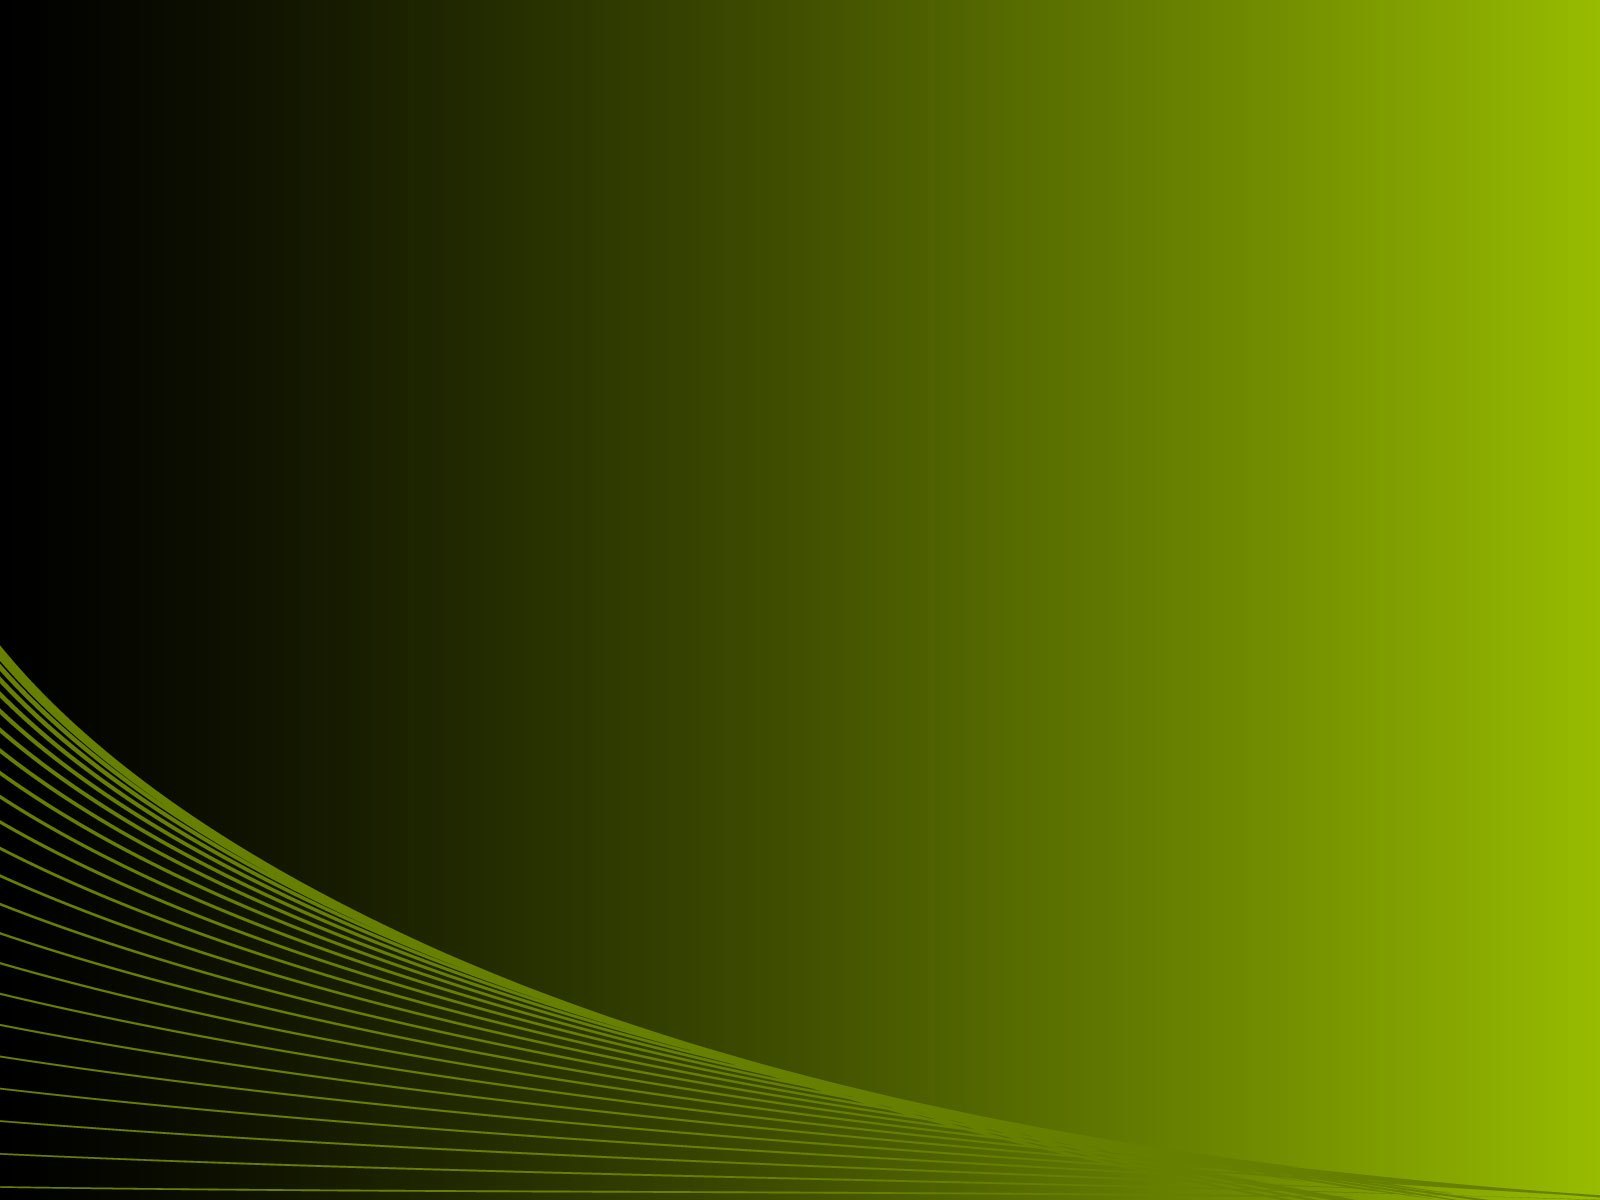 This is the formal black green lines background image You can use